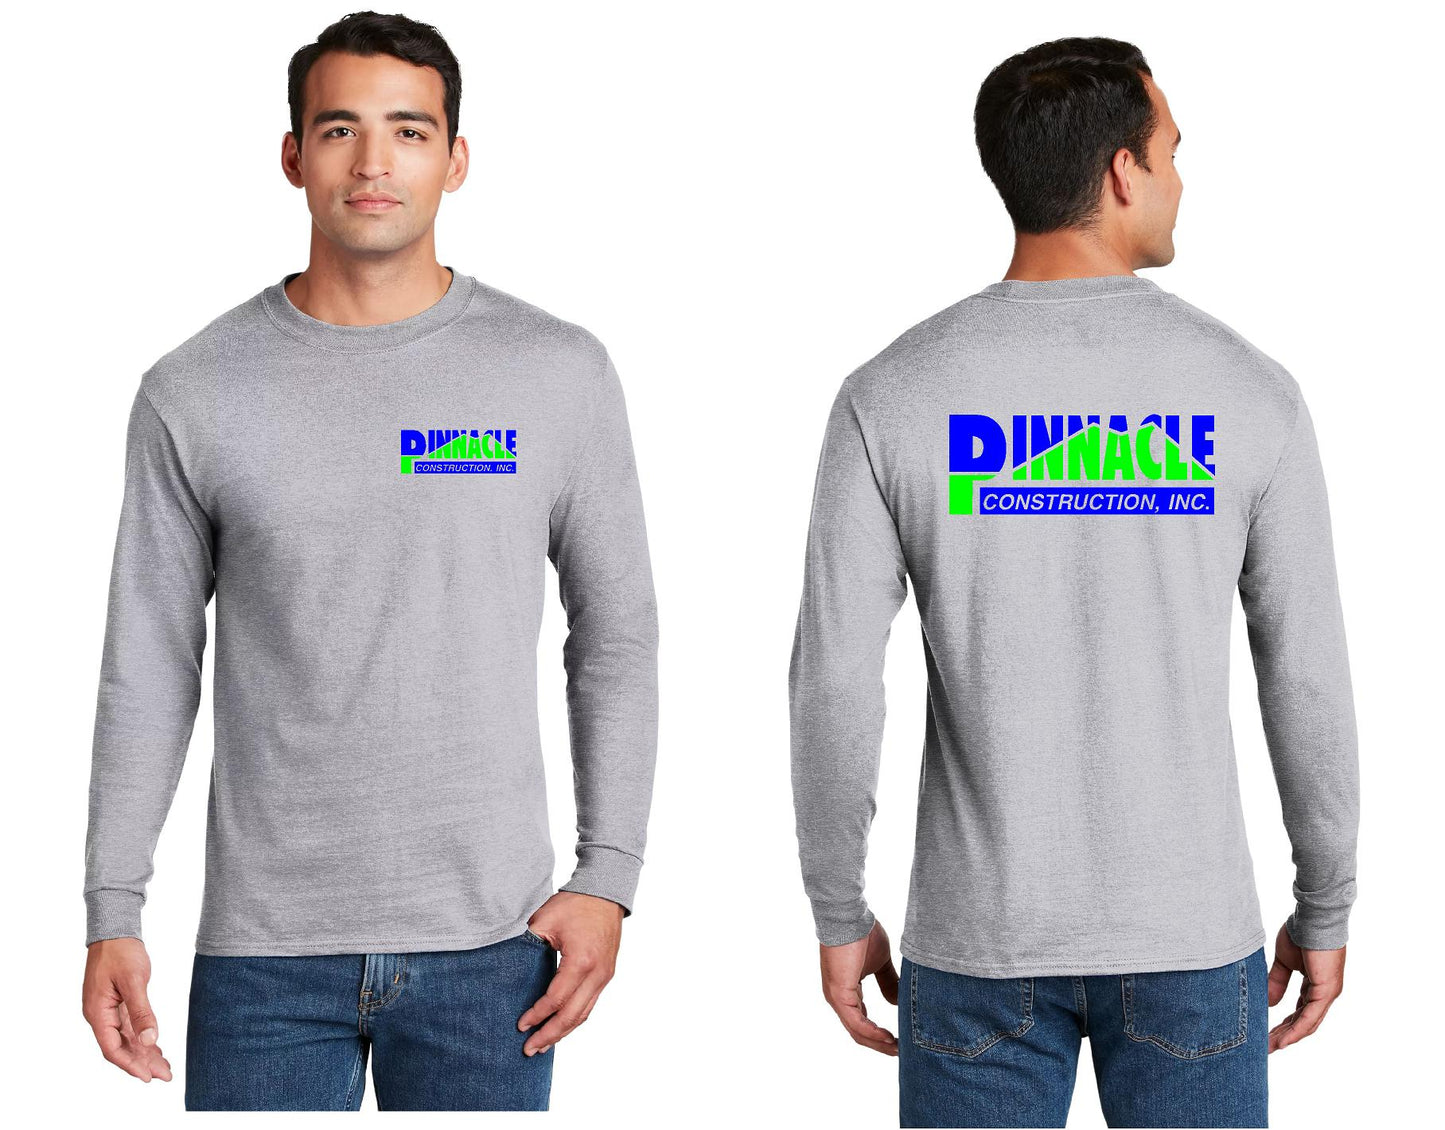 7. PC Hanes® Beefy-T® - 100% Cotton Long Sleeve T-Shirt